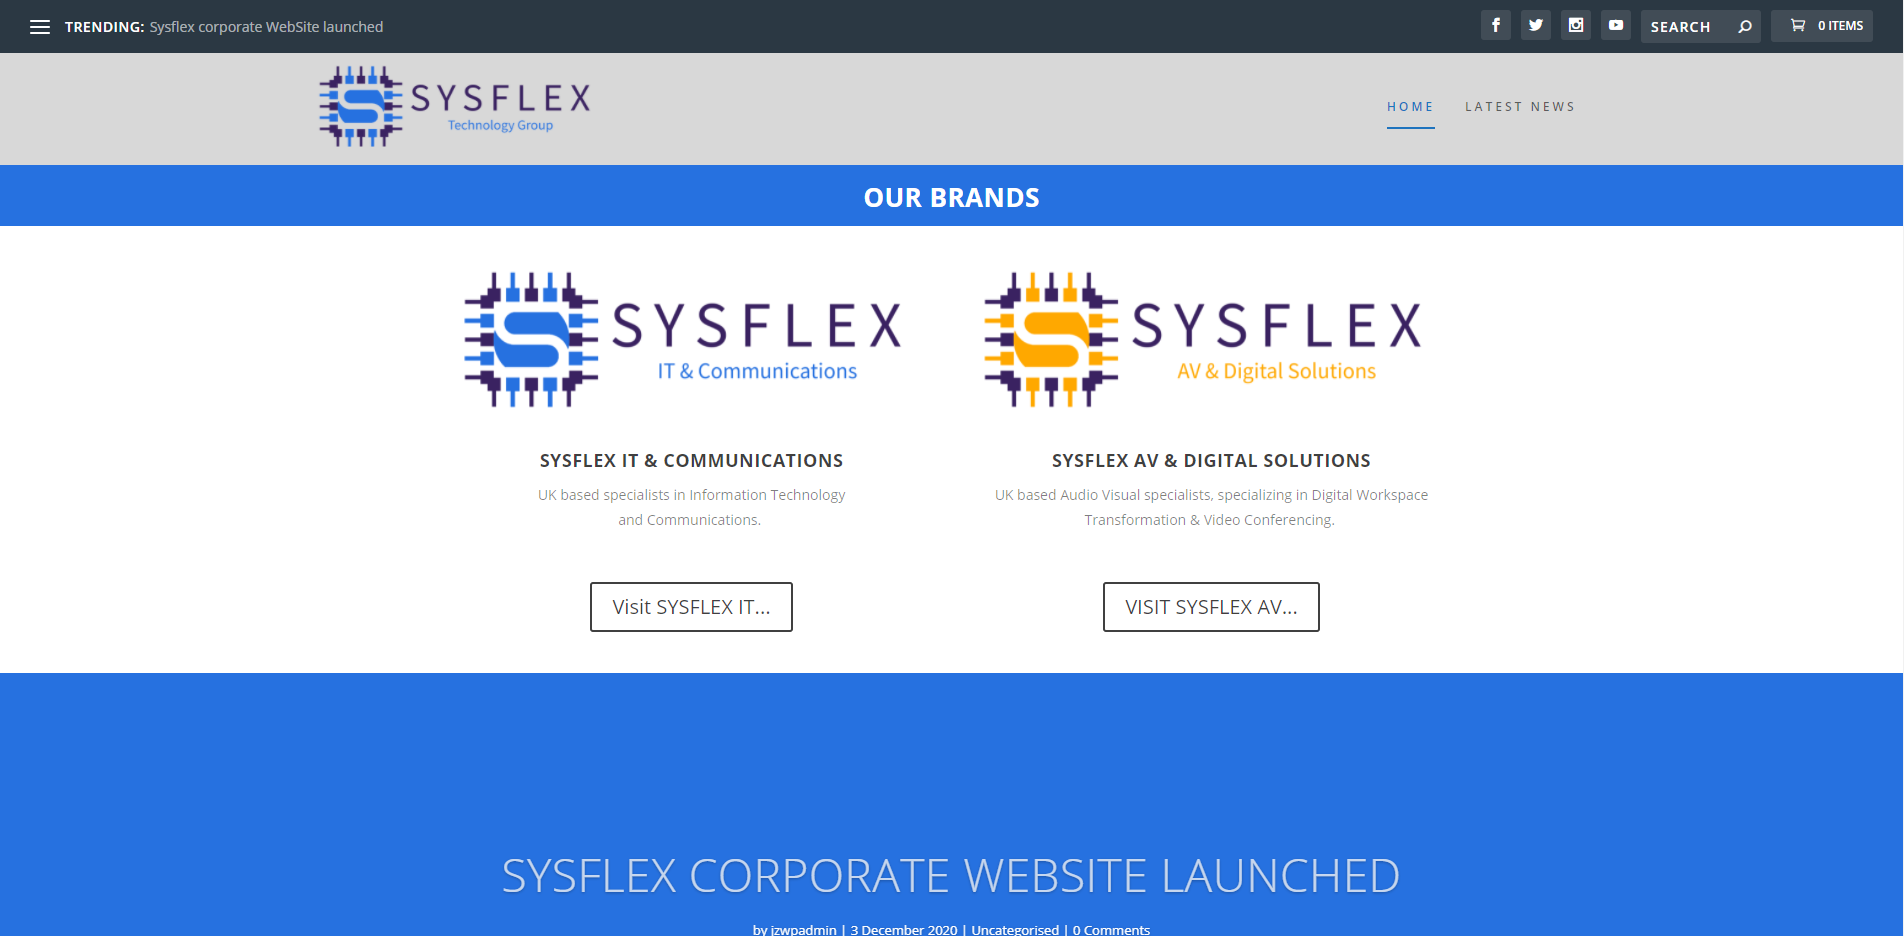 Sysflex corporate website launched